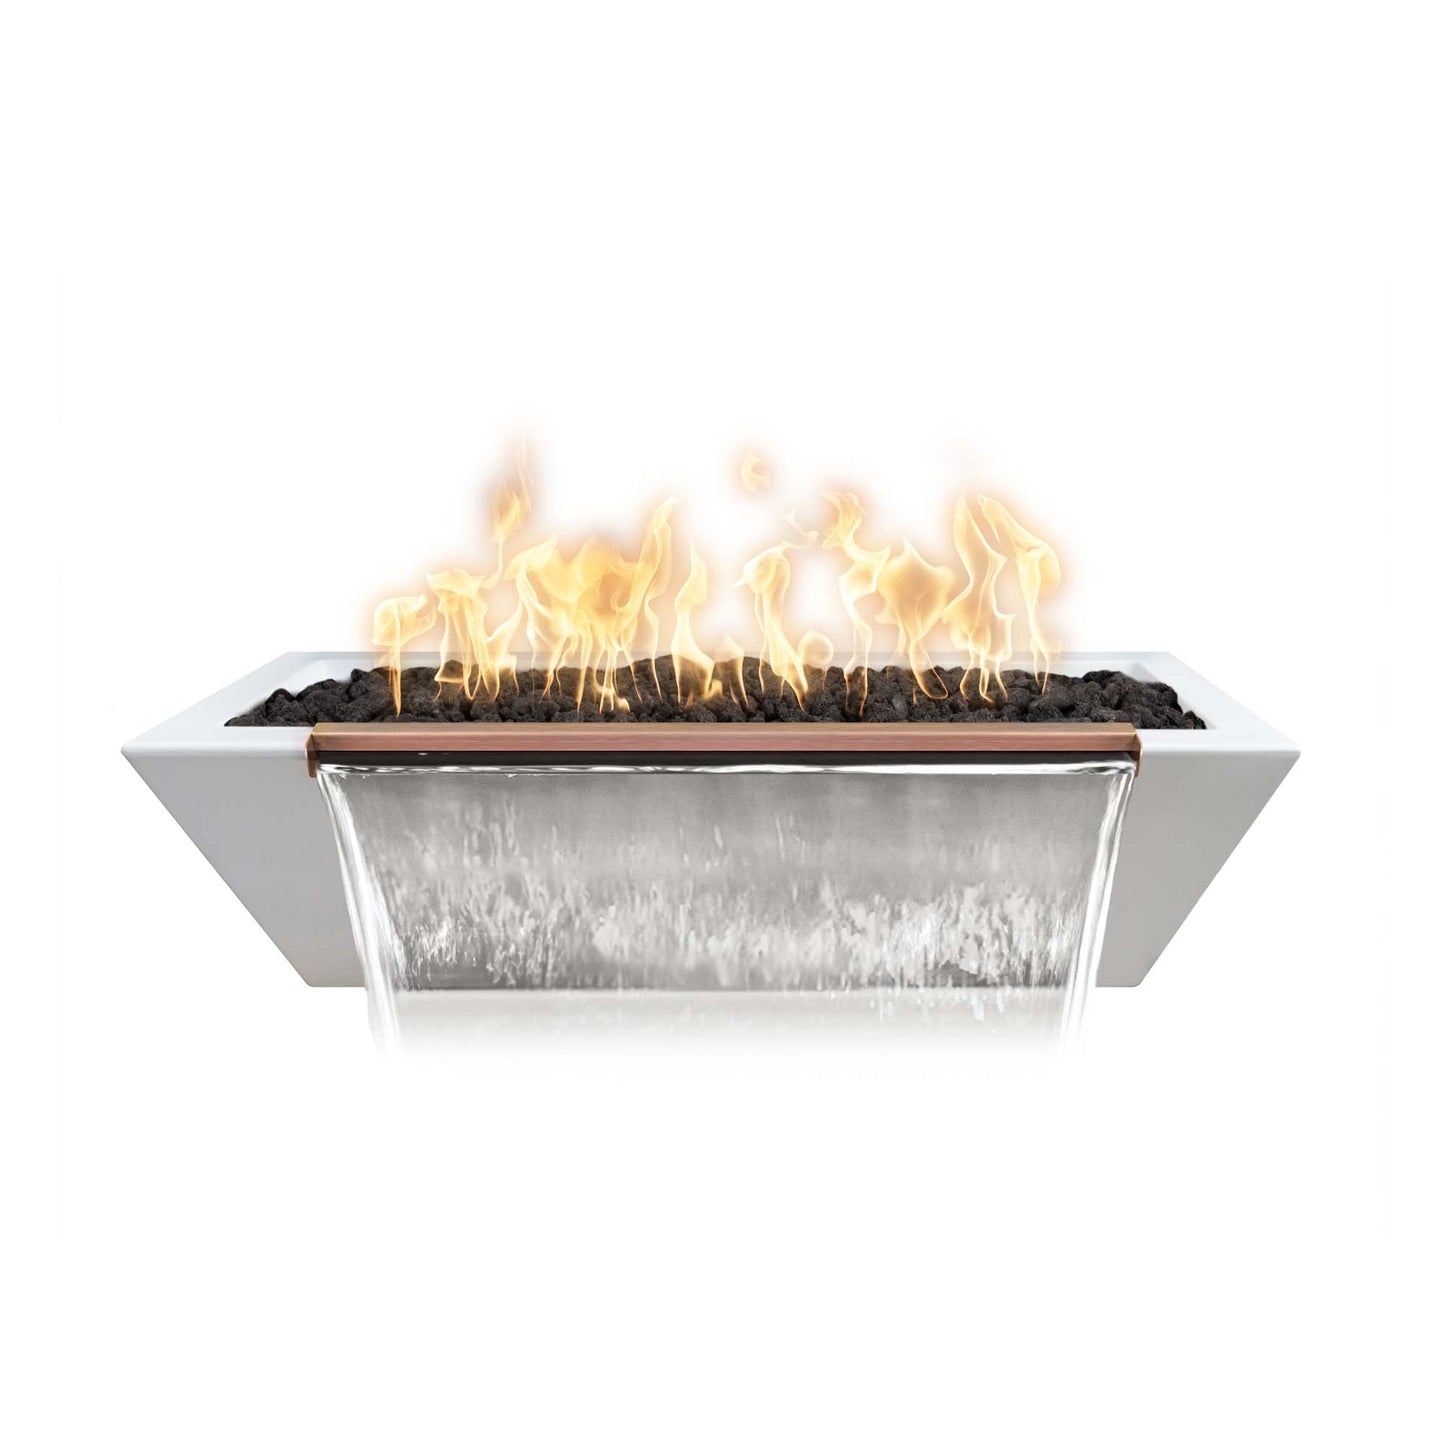 The Outdoor Plus Linear Maya 60" Brown GFRC Concrete Natural Gas Fire & Water Bowl with 12V Electronic Ignition